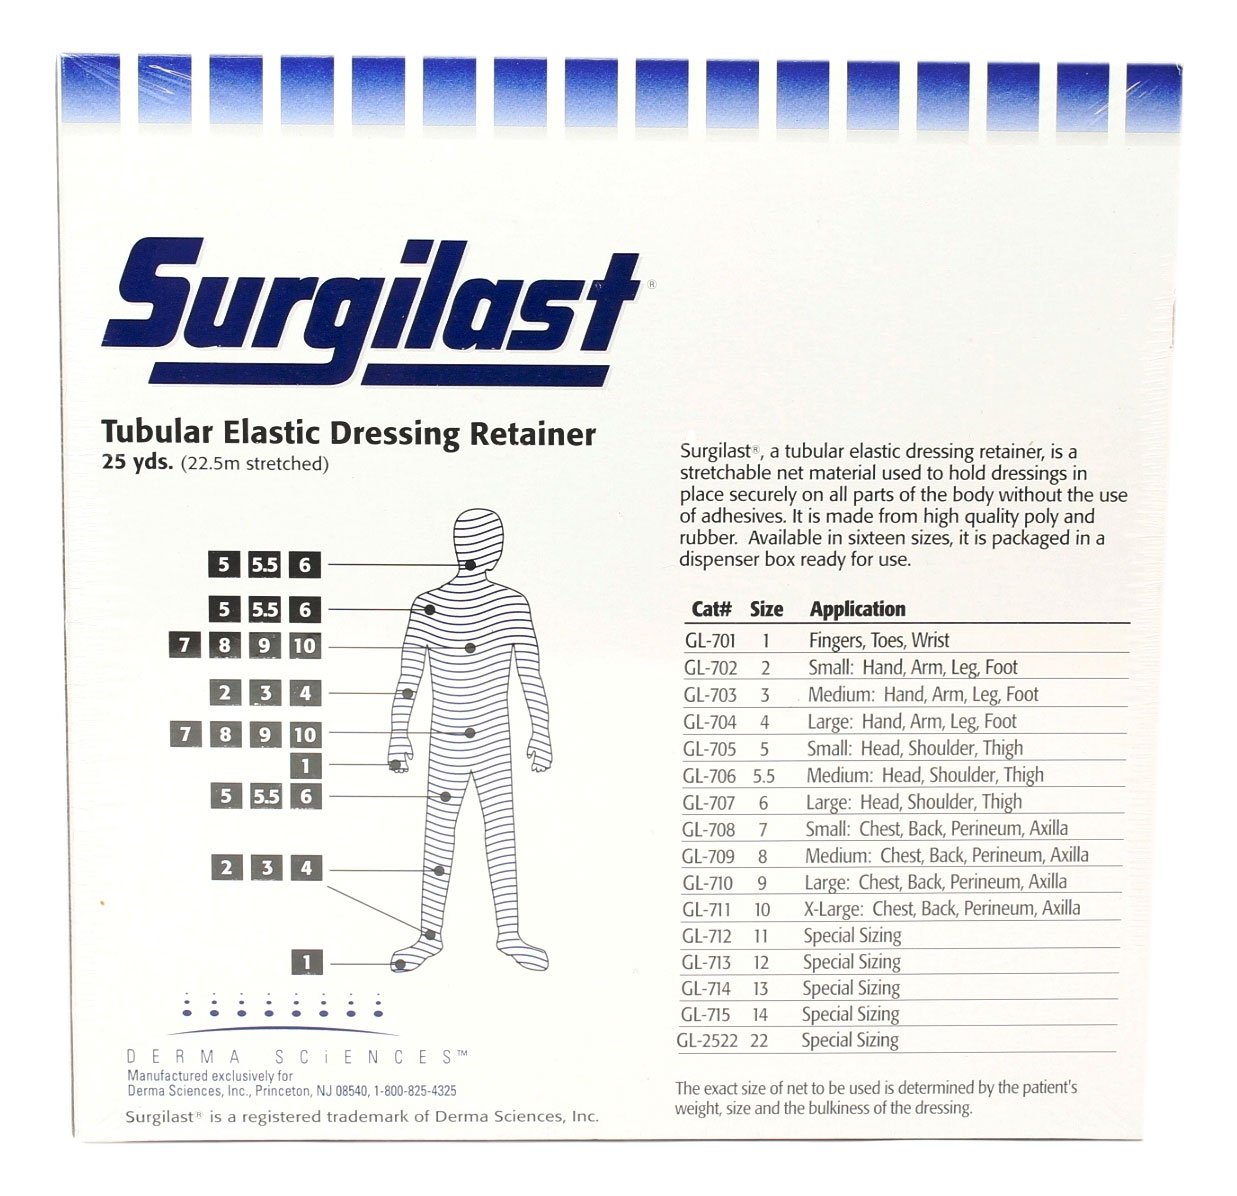 Gl707 Surgilast Tubular Elastic Dressing Retainer, Size 6, 2512 X 25 Yds (Large Head, Shoulder And Thigh) - image 3 of 4